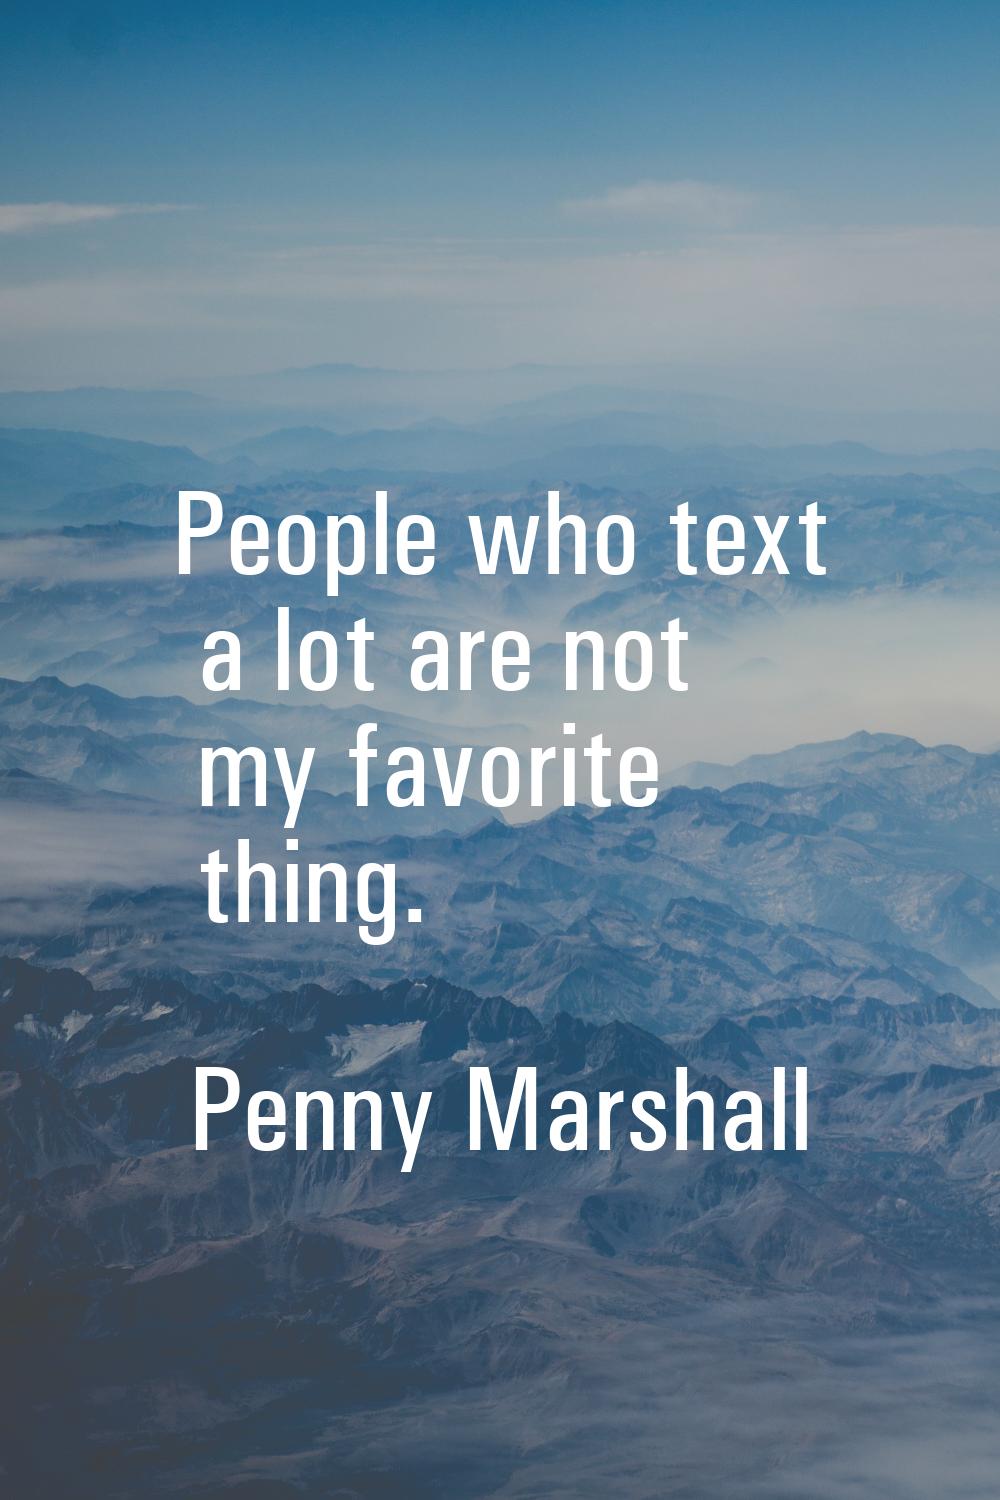 People who text a lot are not my favorite thing.